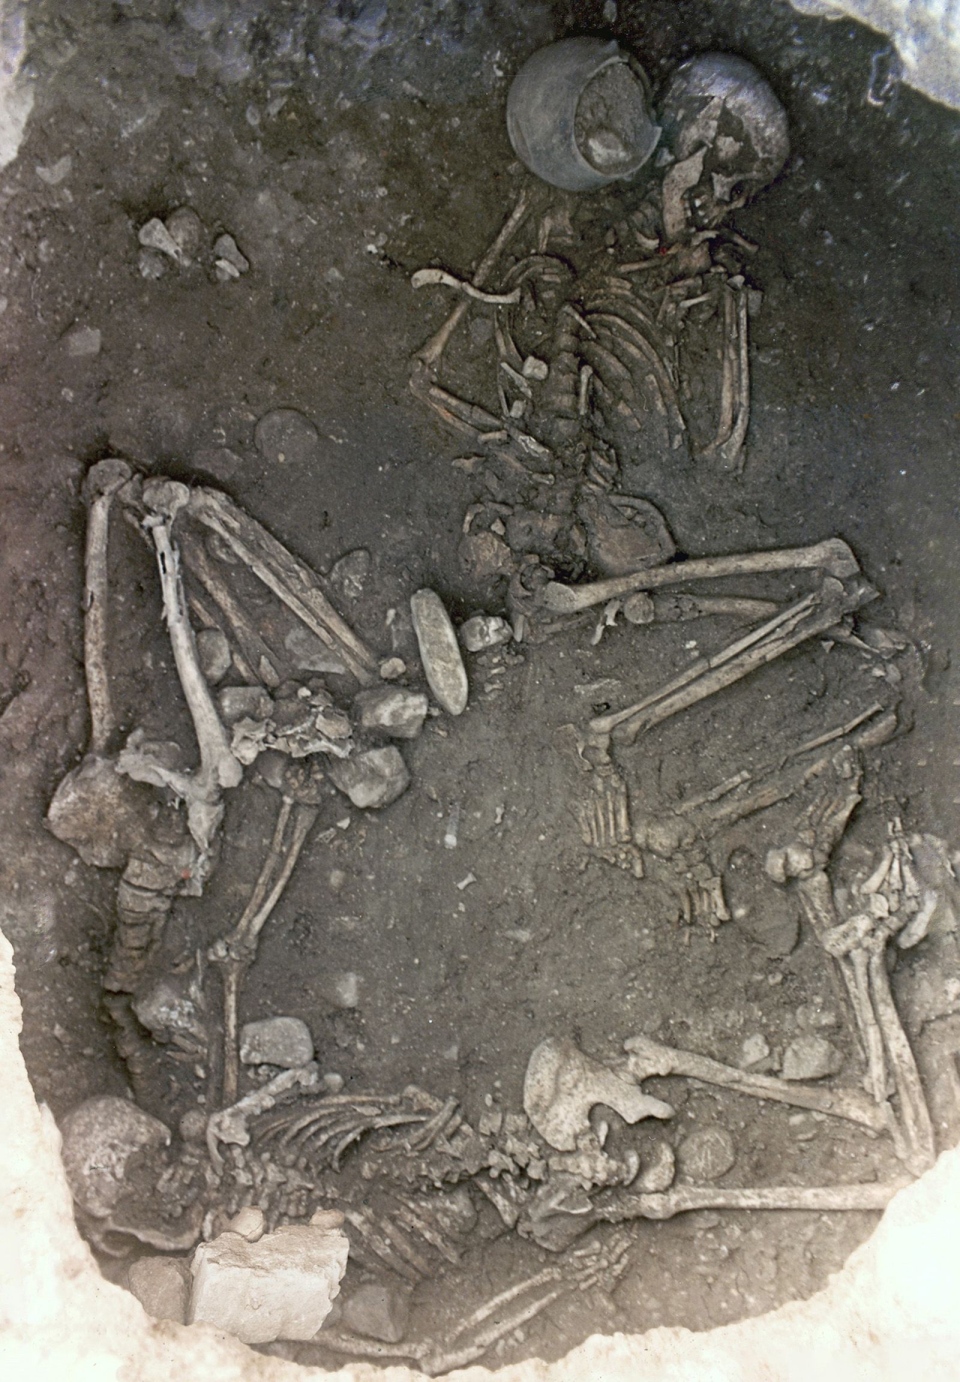 Ancient skeletons unearthed in France